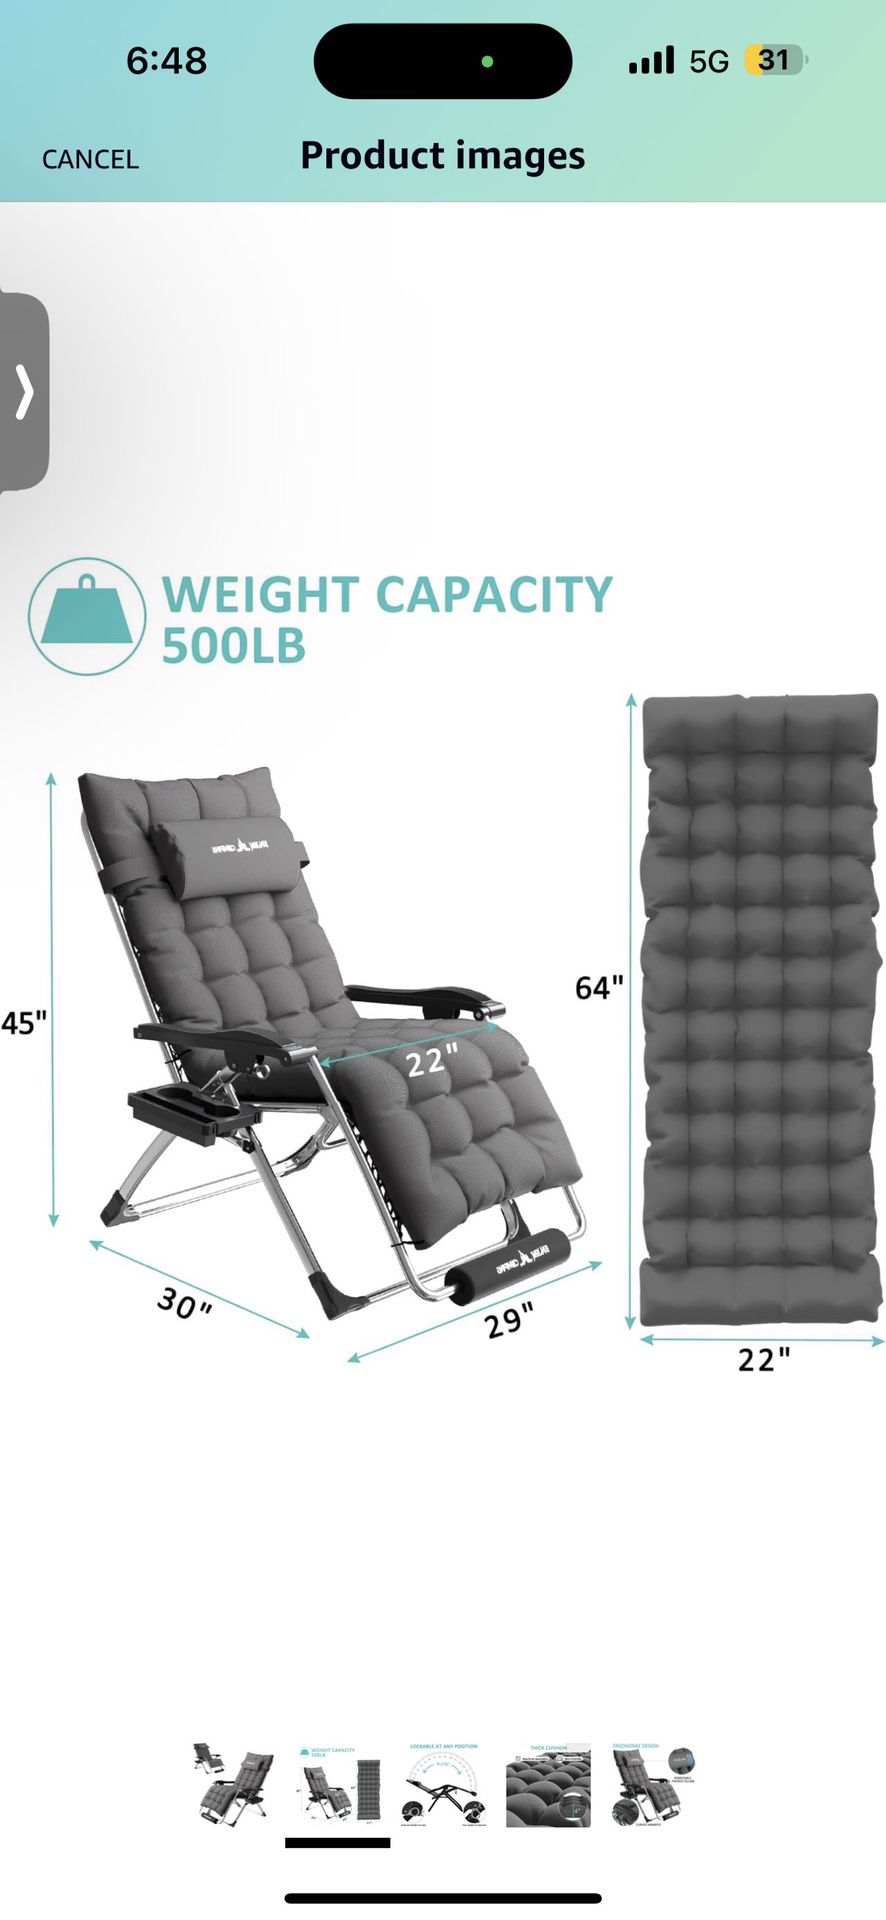 Zero Gravity Chair 22" Seat Width, XL Lounge Chairs w/Cushion, Folding Reclining Camping Chair for Outside Deck, Yard, Porch, Pool, Dark Grey